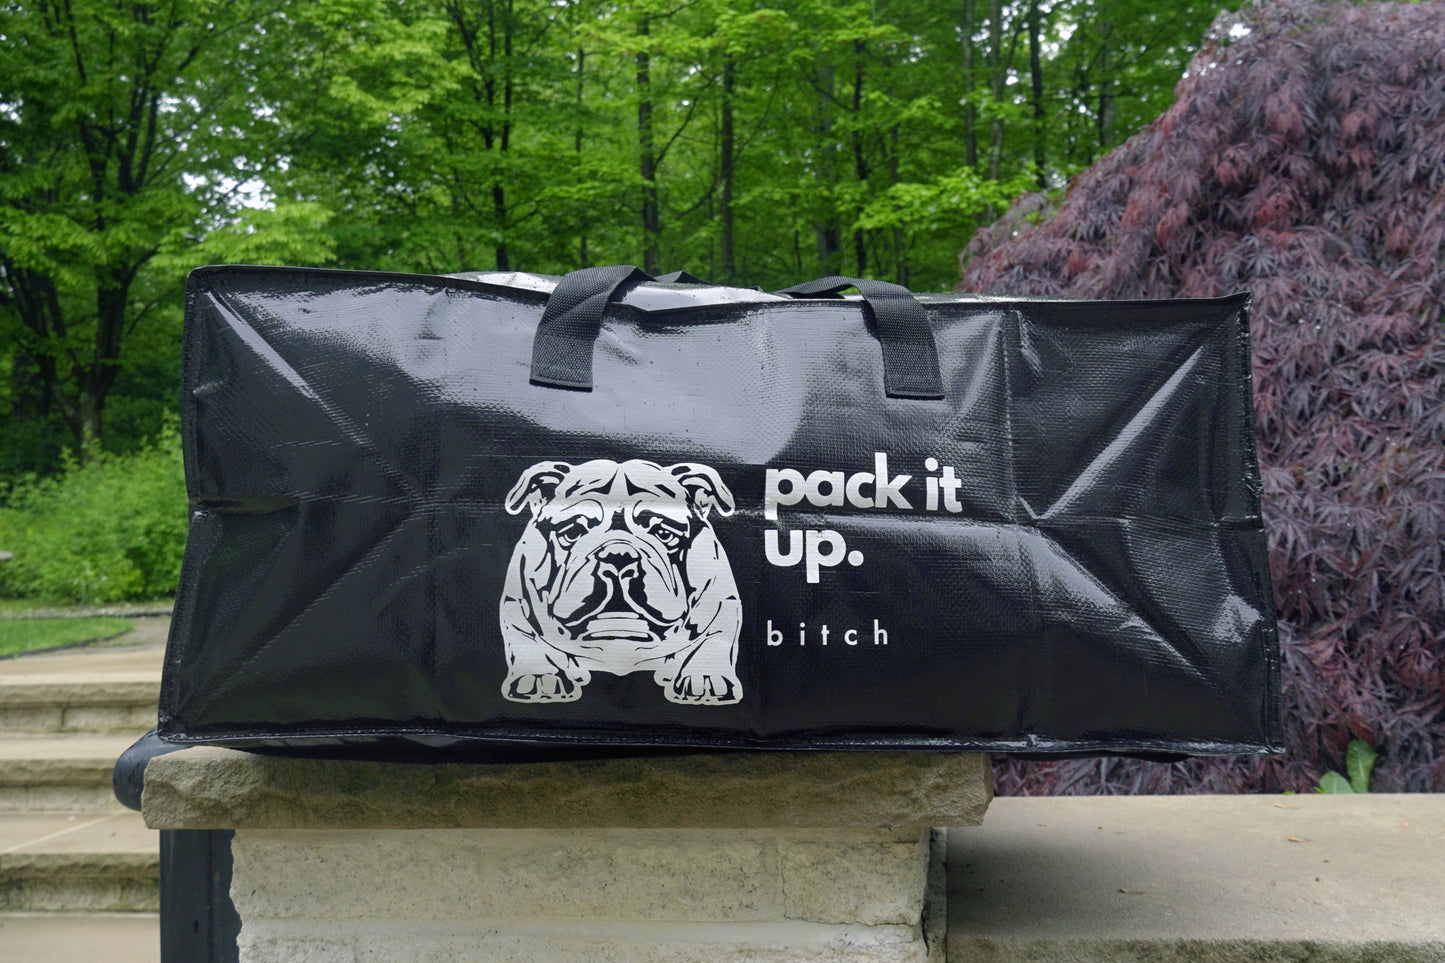 black rectangular bag with "pack it up bruh" and a black and white bulldog logo on the side.